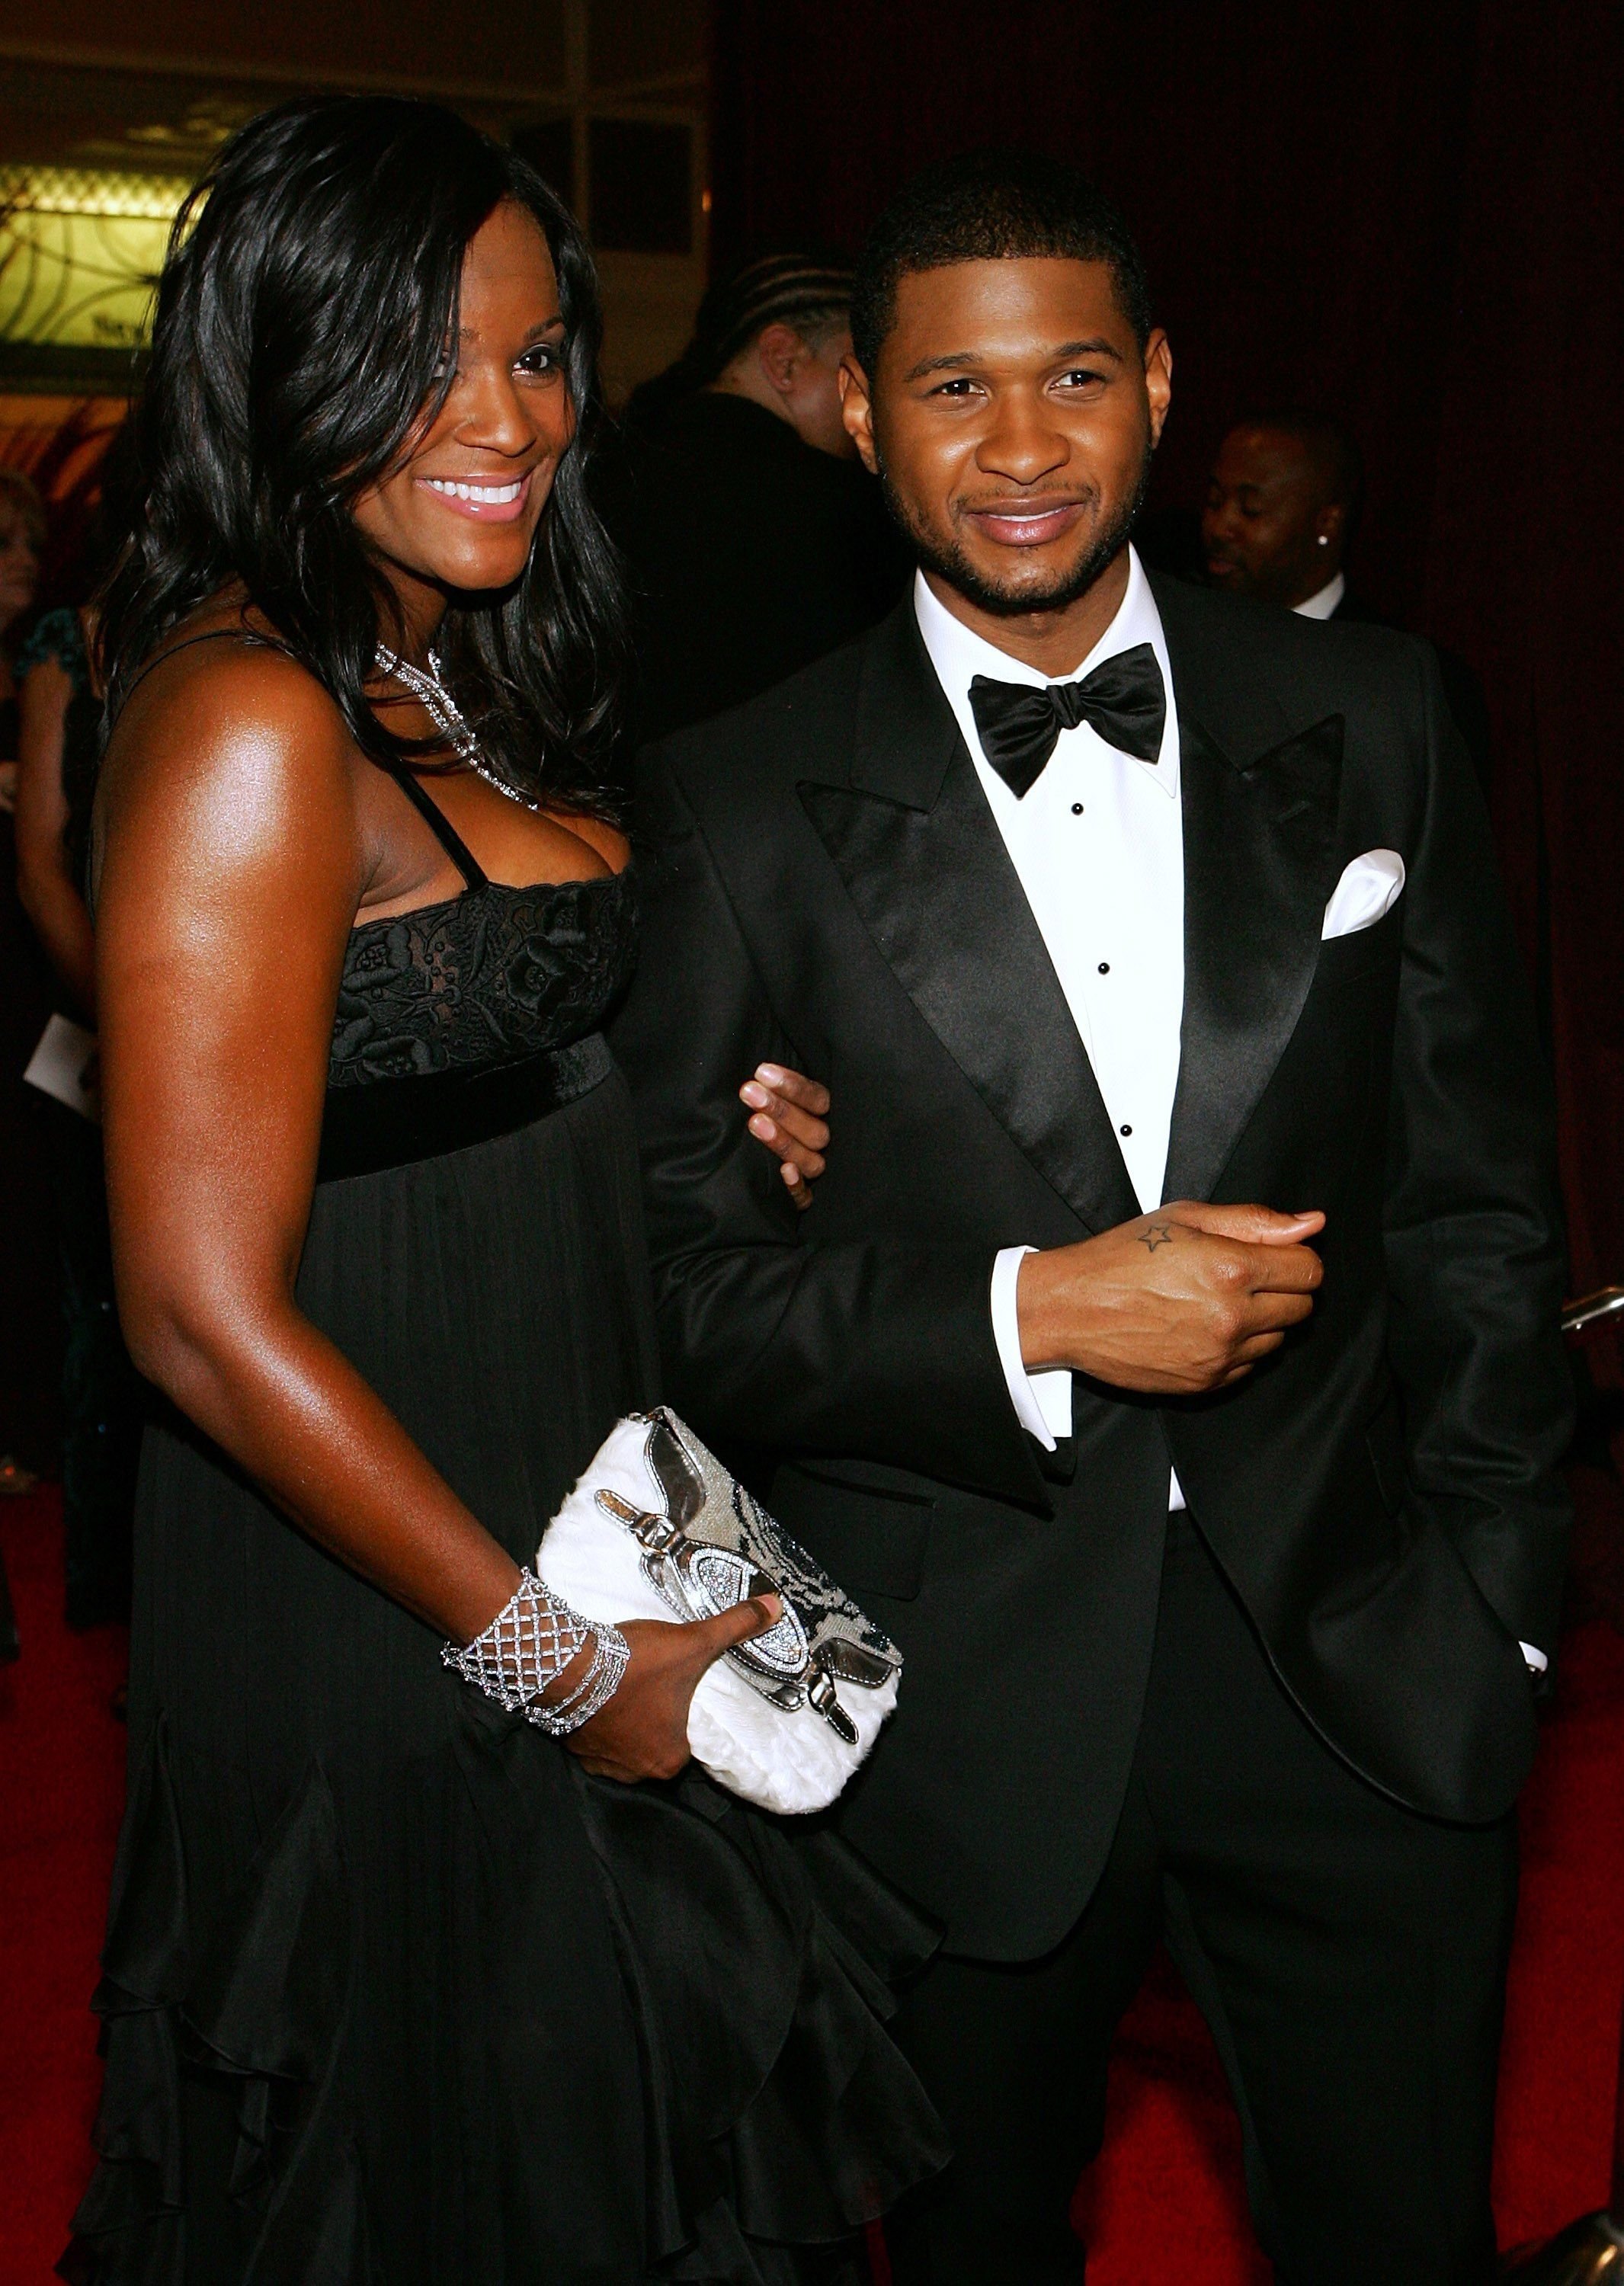 Usher Raymond and Tameka Foster attend the 15th annual Trumpet Awards at the Bellagio on January 22, 2007. | Source: Getty Images